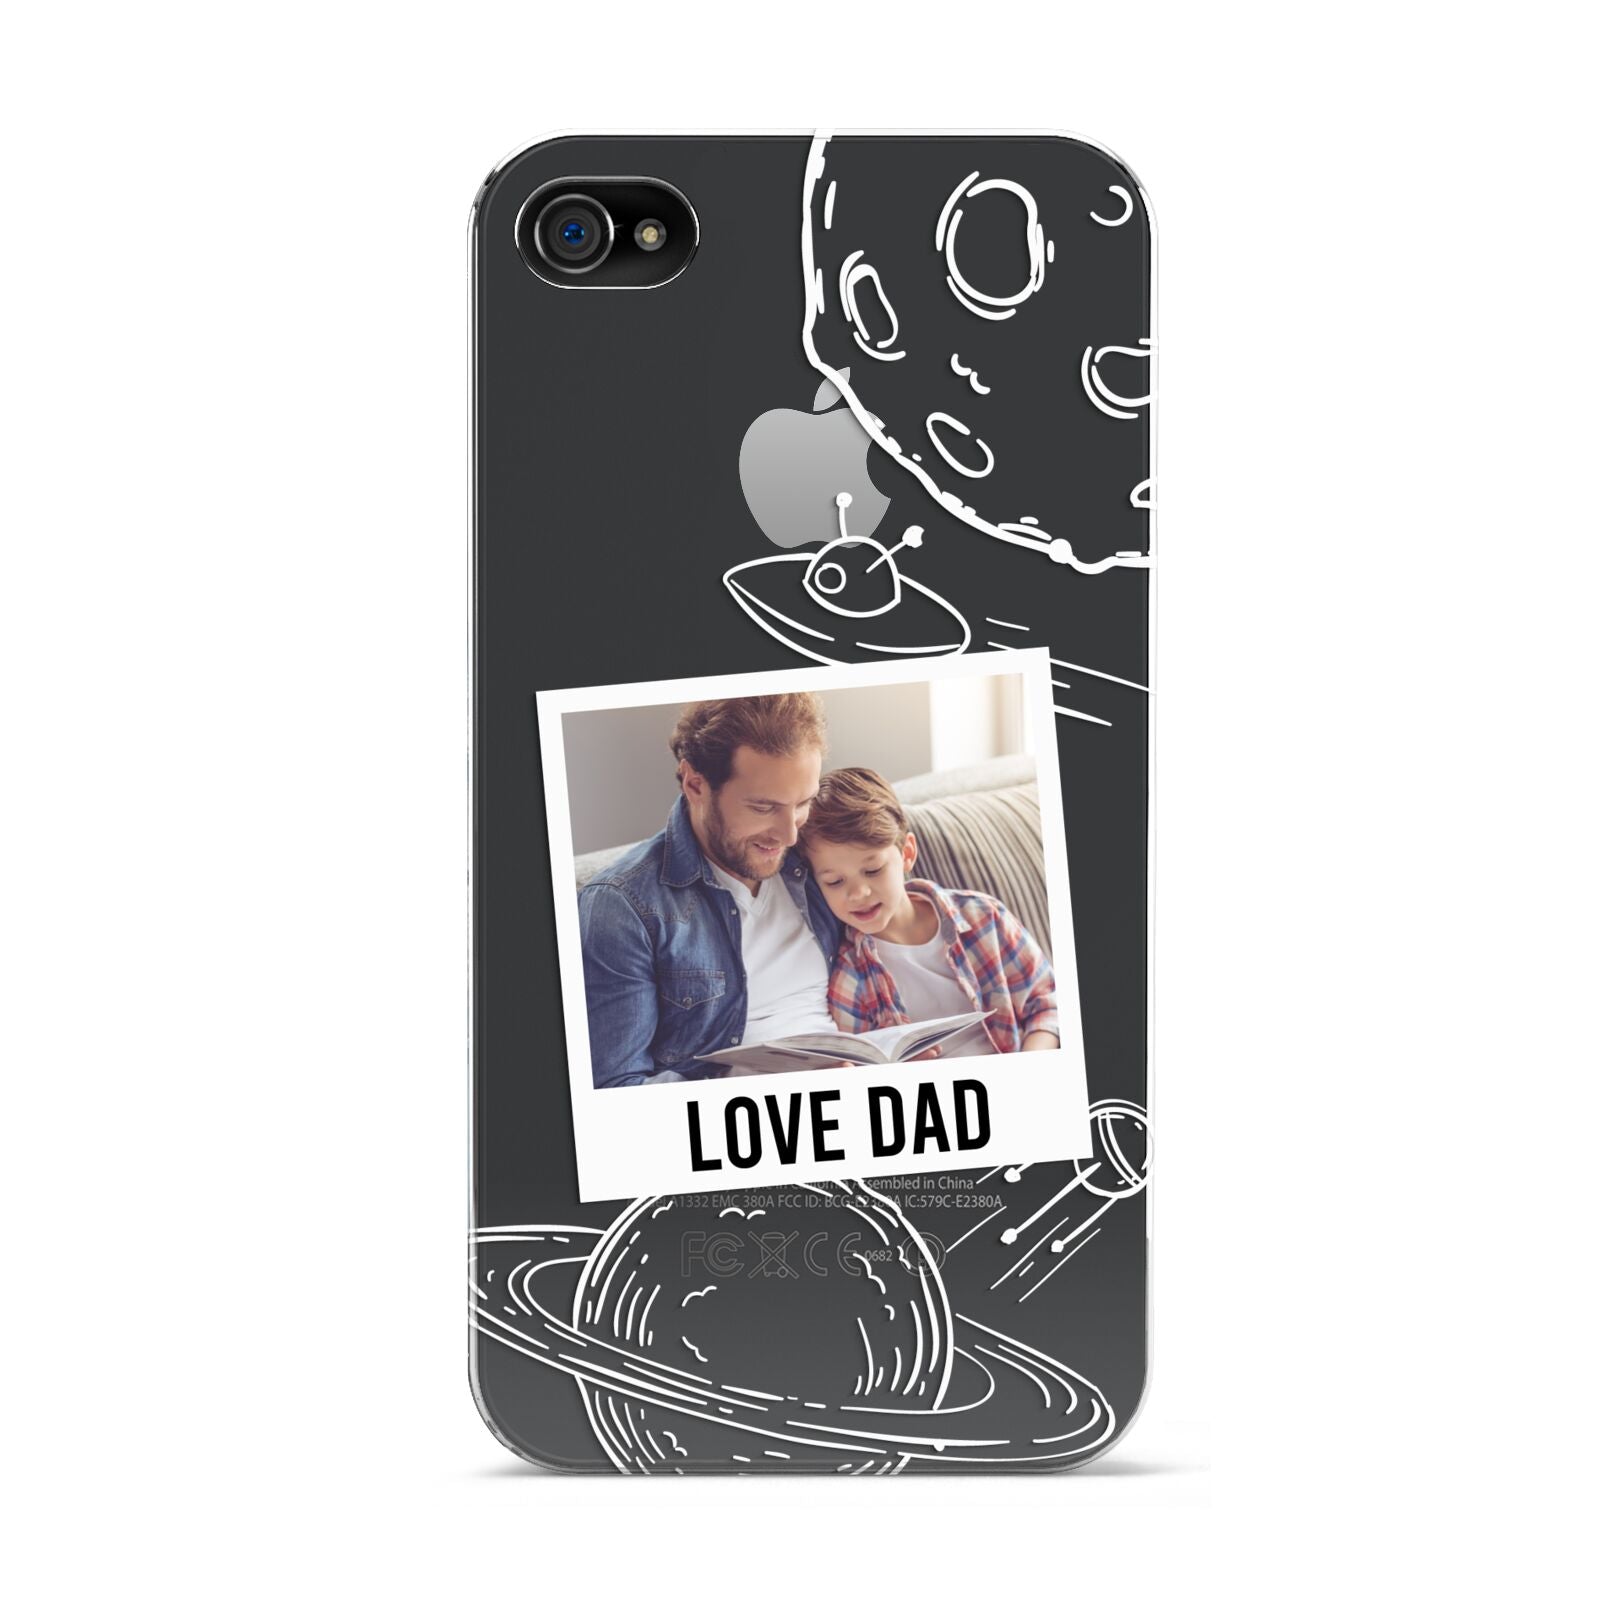 Personalised From Dad Photo Apple iPhone 4s Case